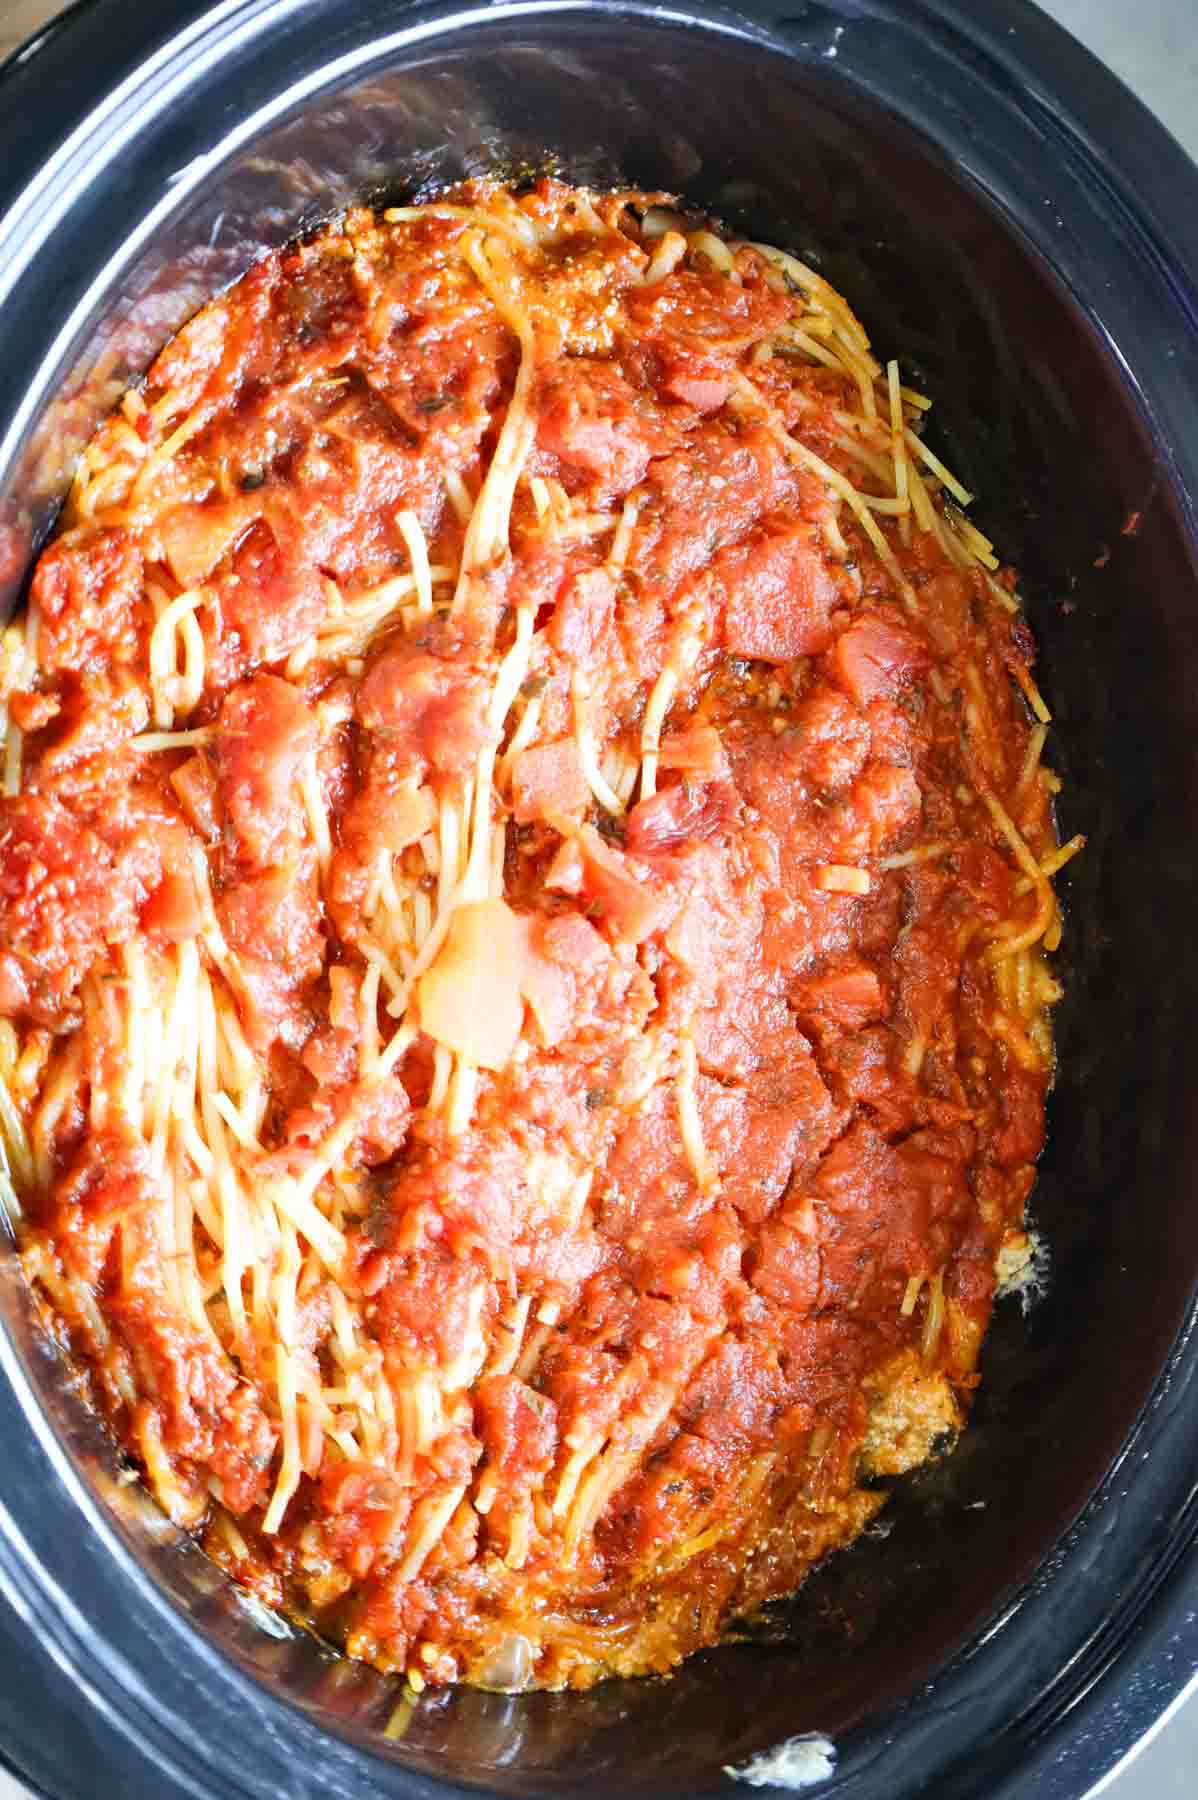 spaghetti in a crock pot after cooking